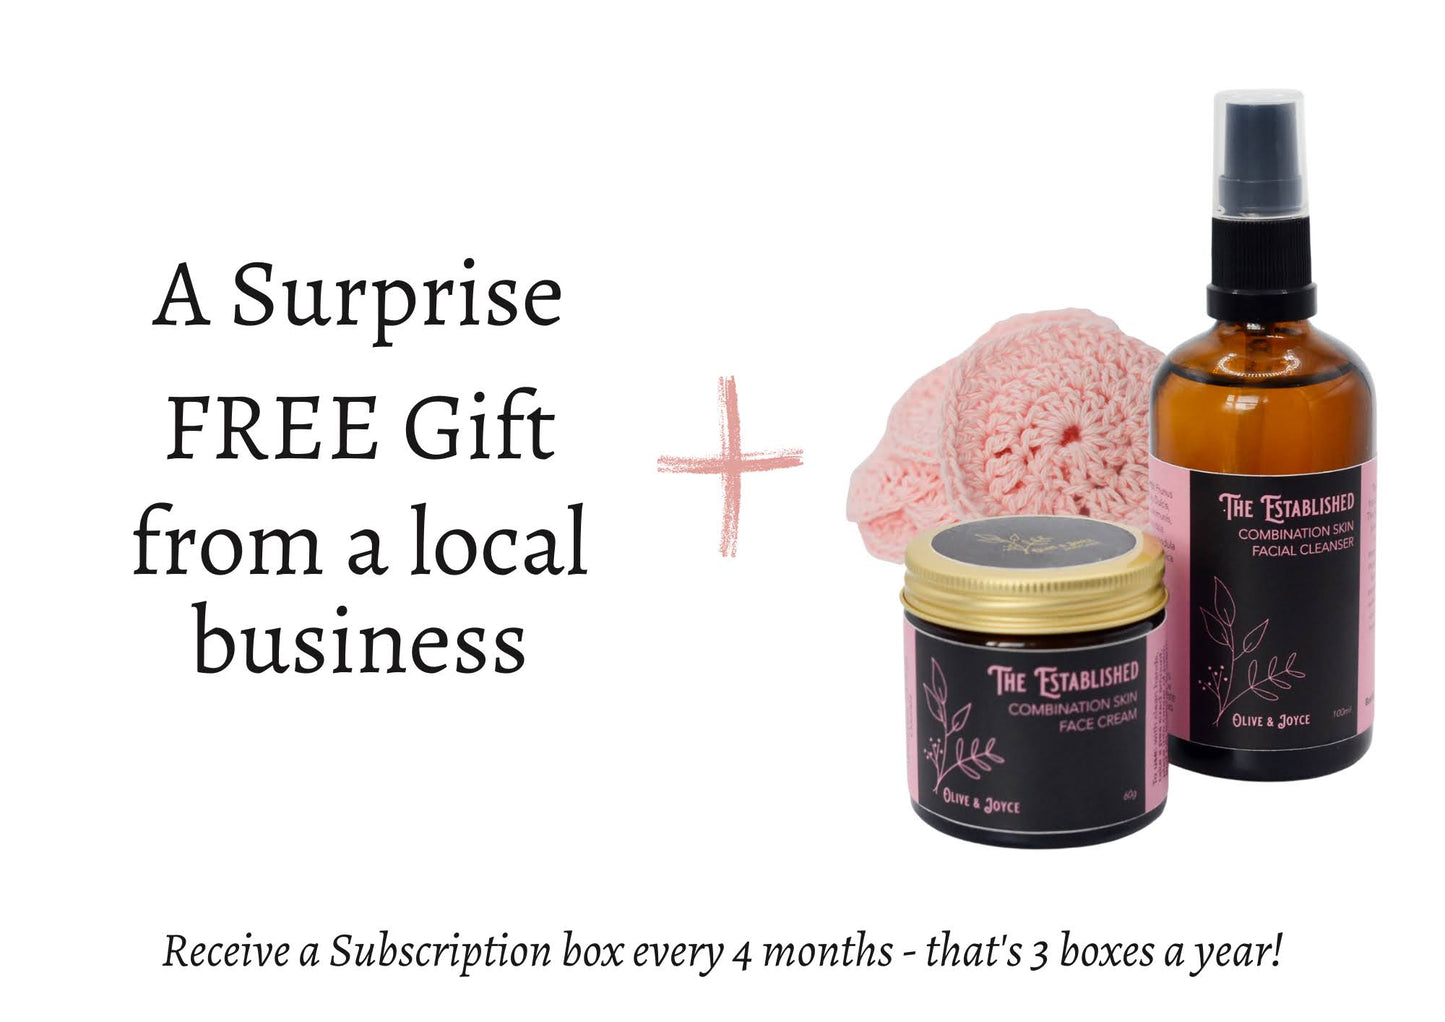 Subscription Box | The Established For Combination Skin